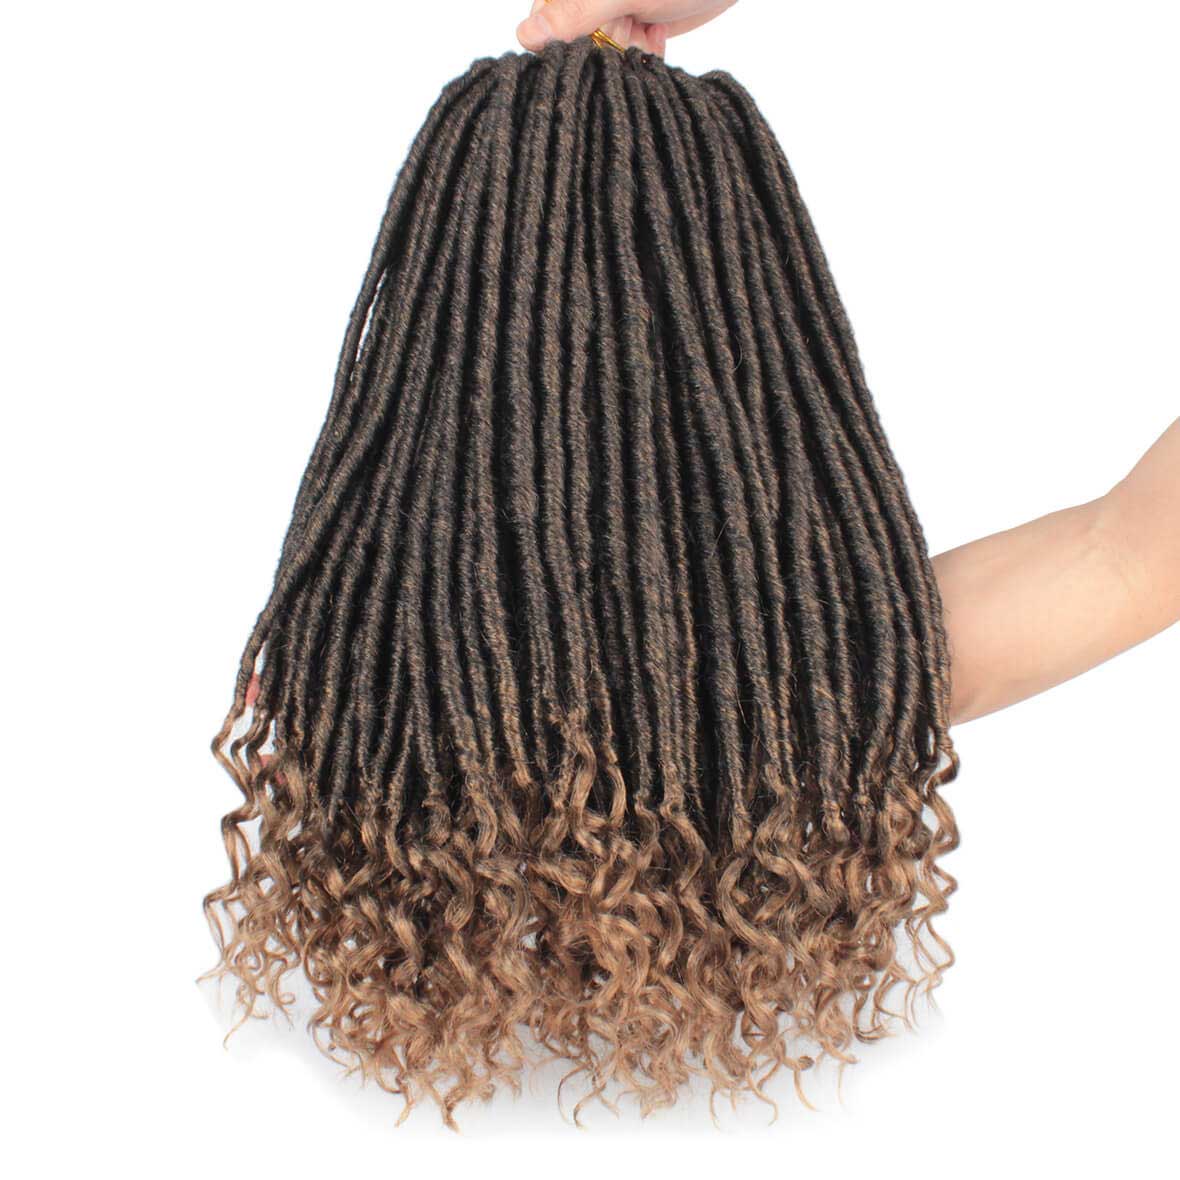 18 Inch goddess faux locs crochet braids hair 24roots straight faux locs with curly end cute soft dreadlock for black women